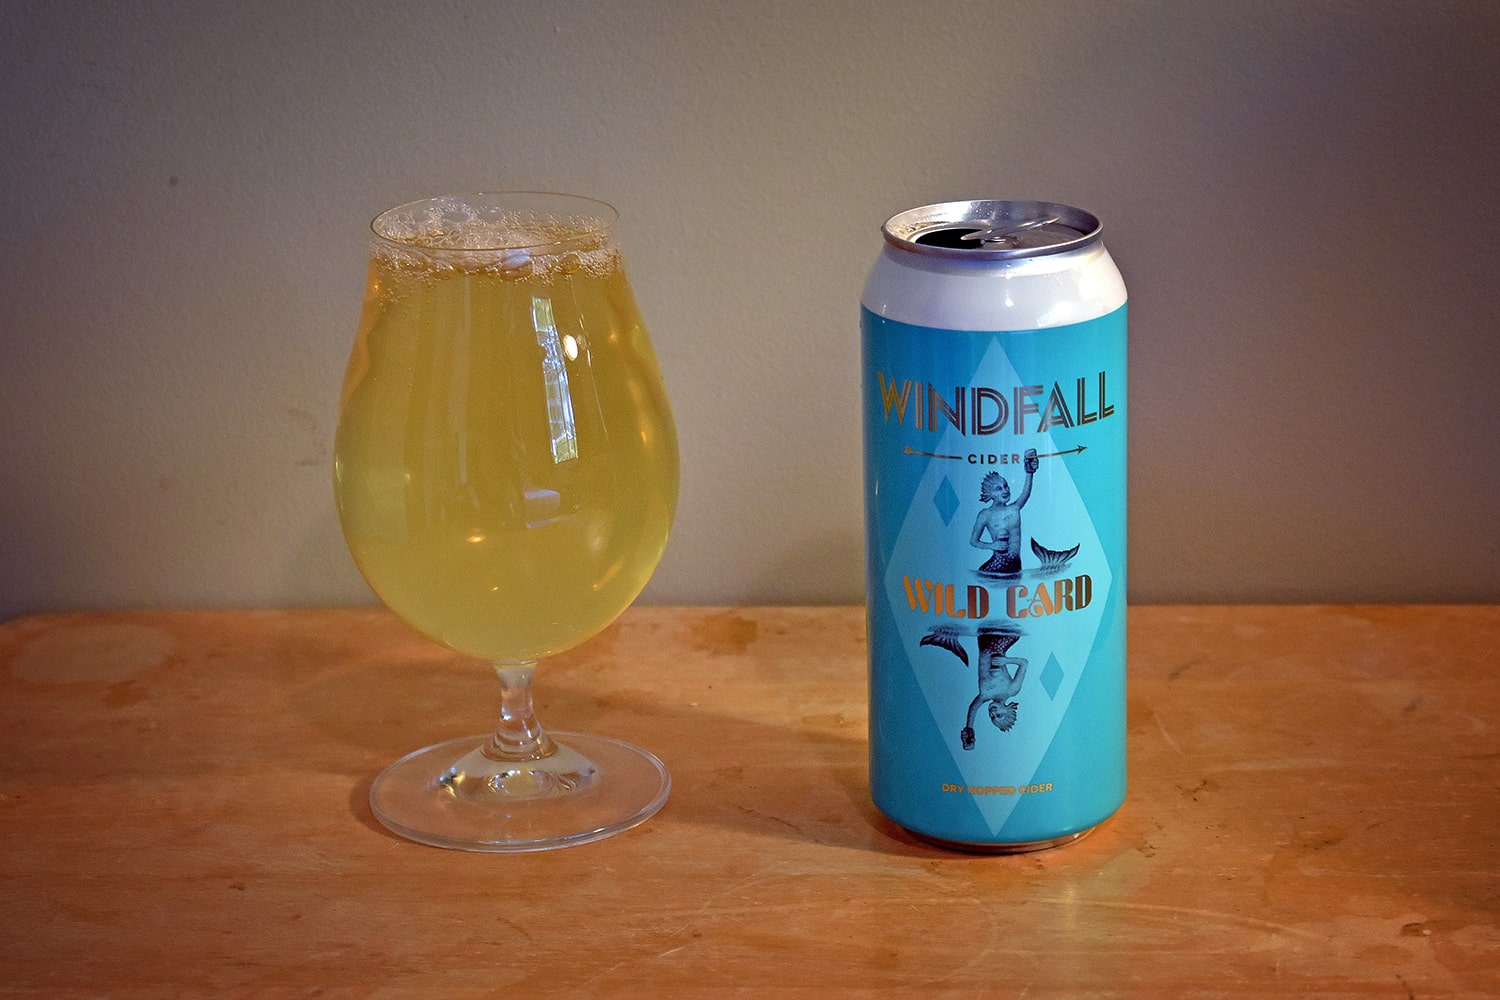 Wild Card by Windfall Cider